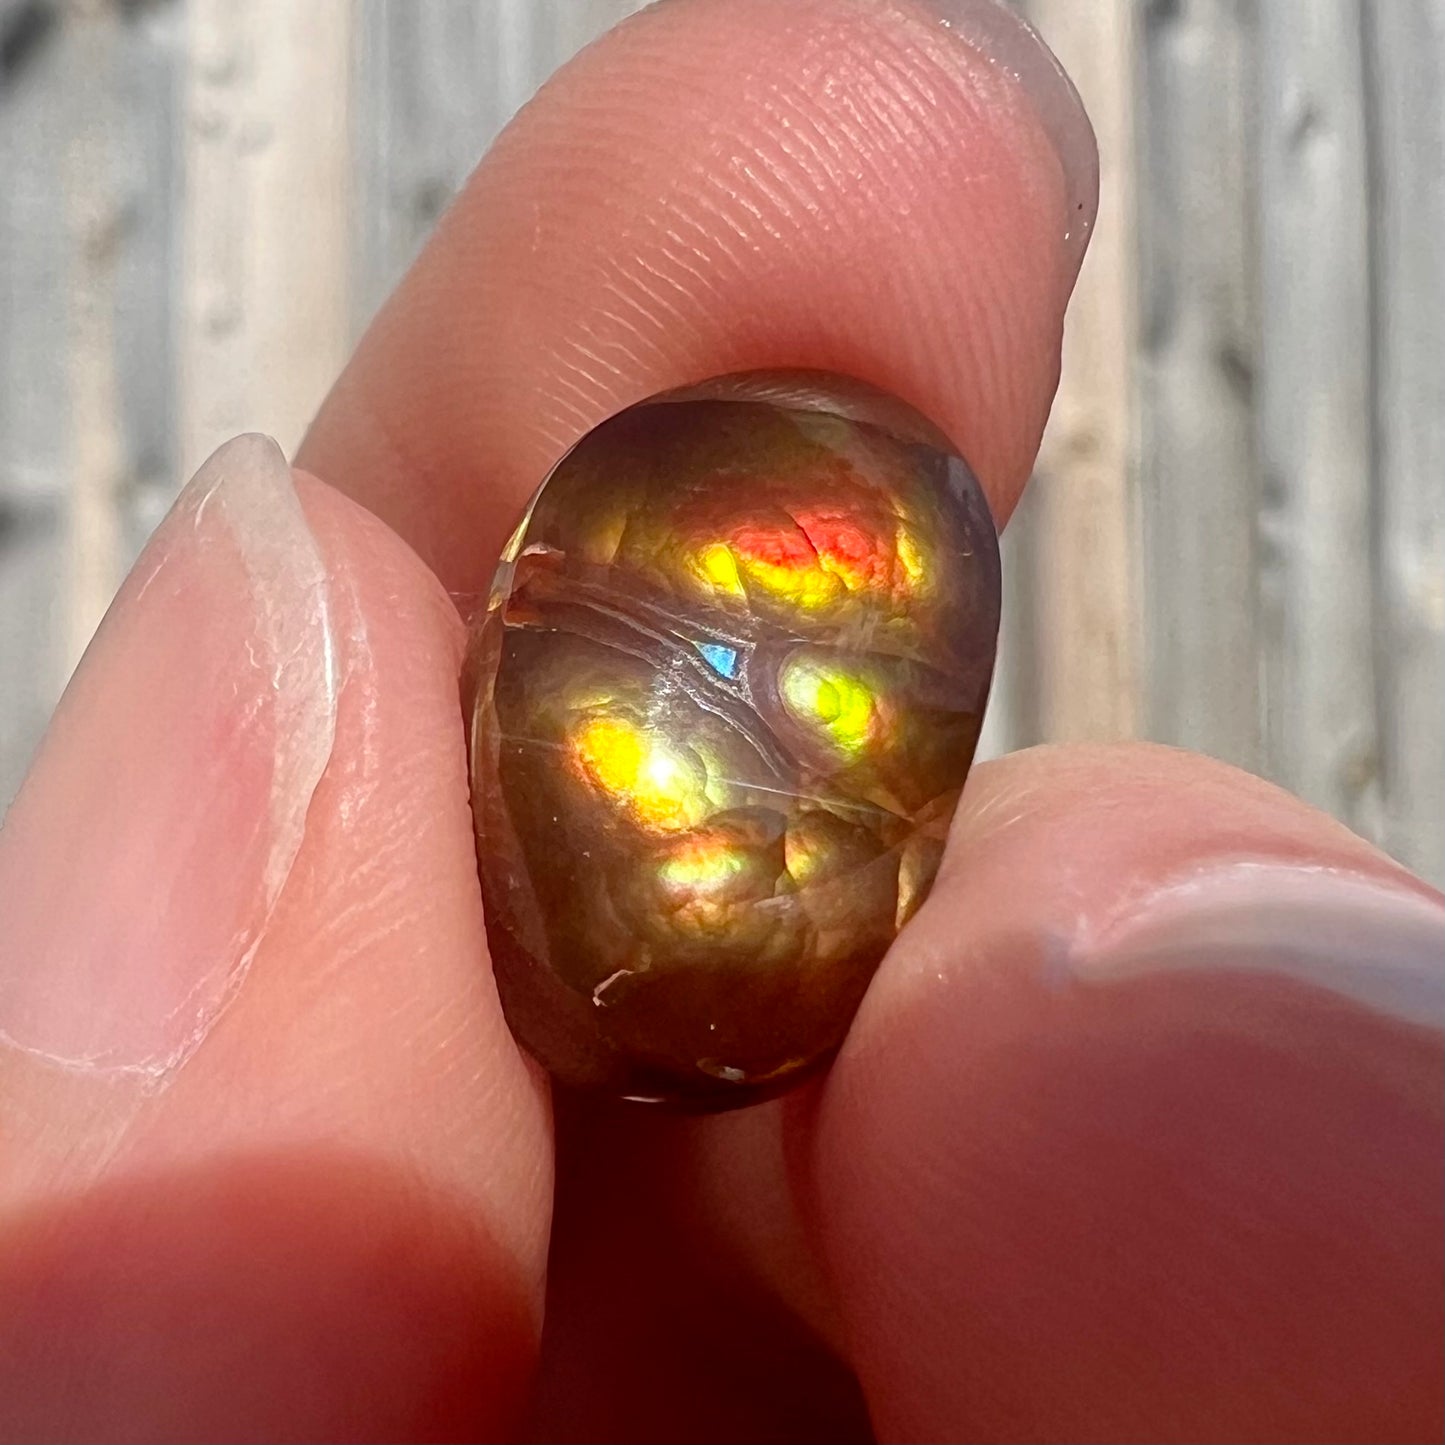 A loose Mexican fire agate cabochon.  The stone has a bright purple and blue iris pattern.